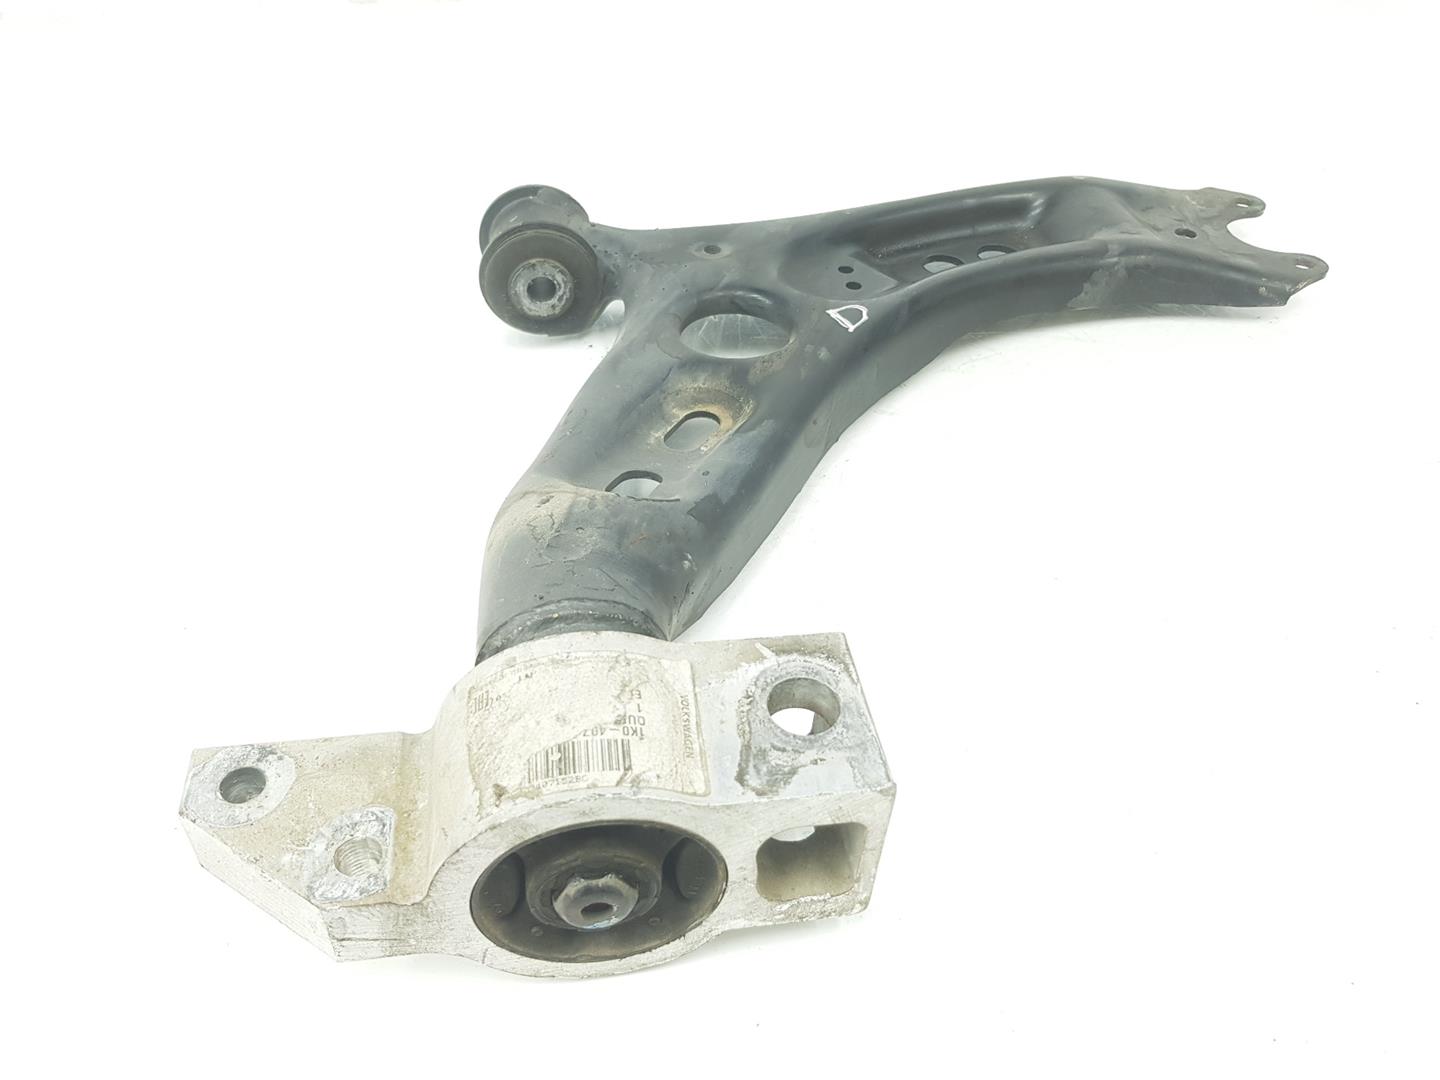 VOLKSWAGEN Scirocco 3 generation (2008-2020) Front Right Arm 1K0407152BC, 1K0407152BC 24833807